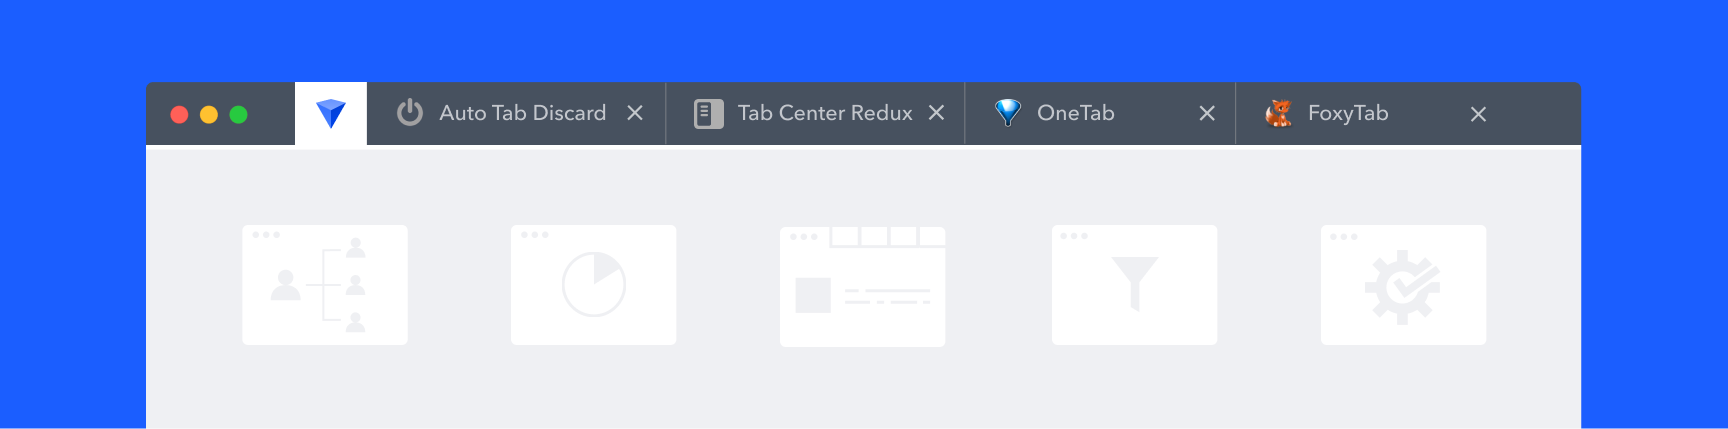 Browser interface against blue background, with top Firefox tab managers displayed as tabs